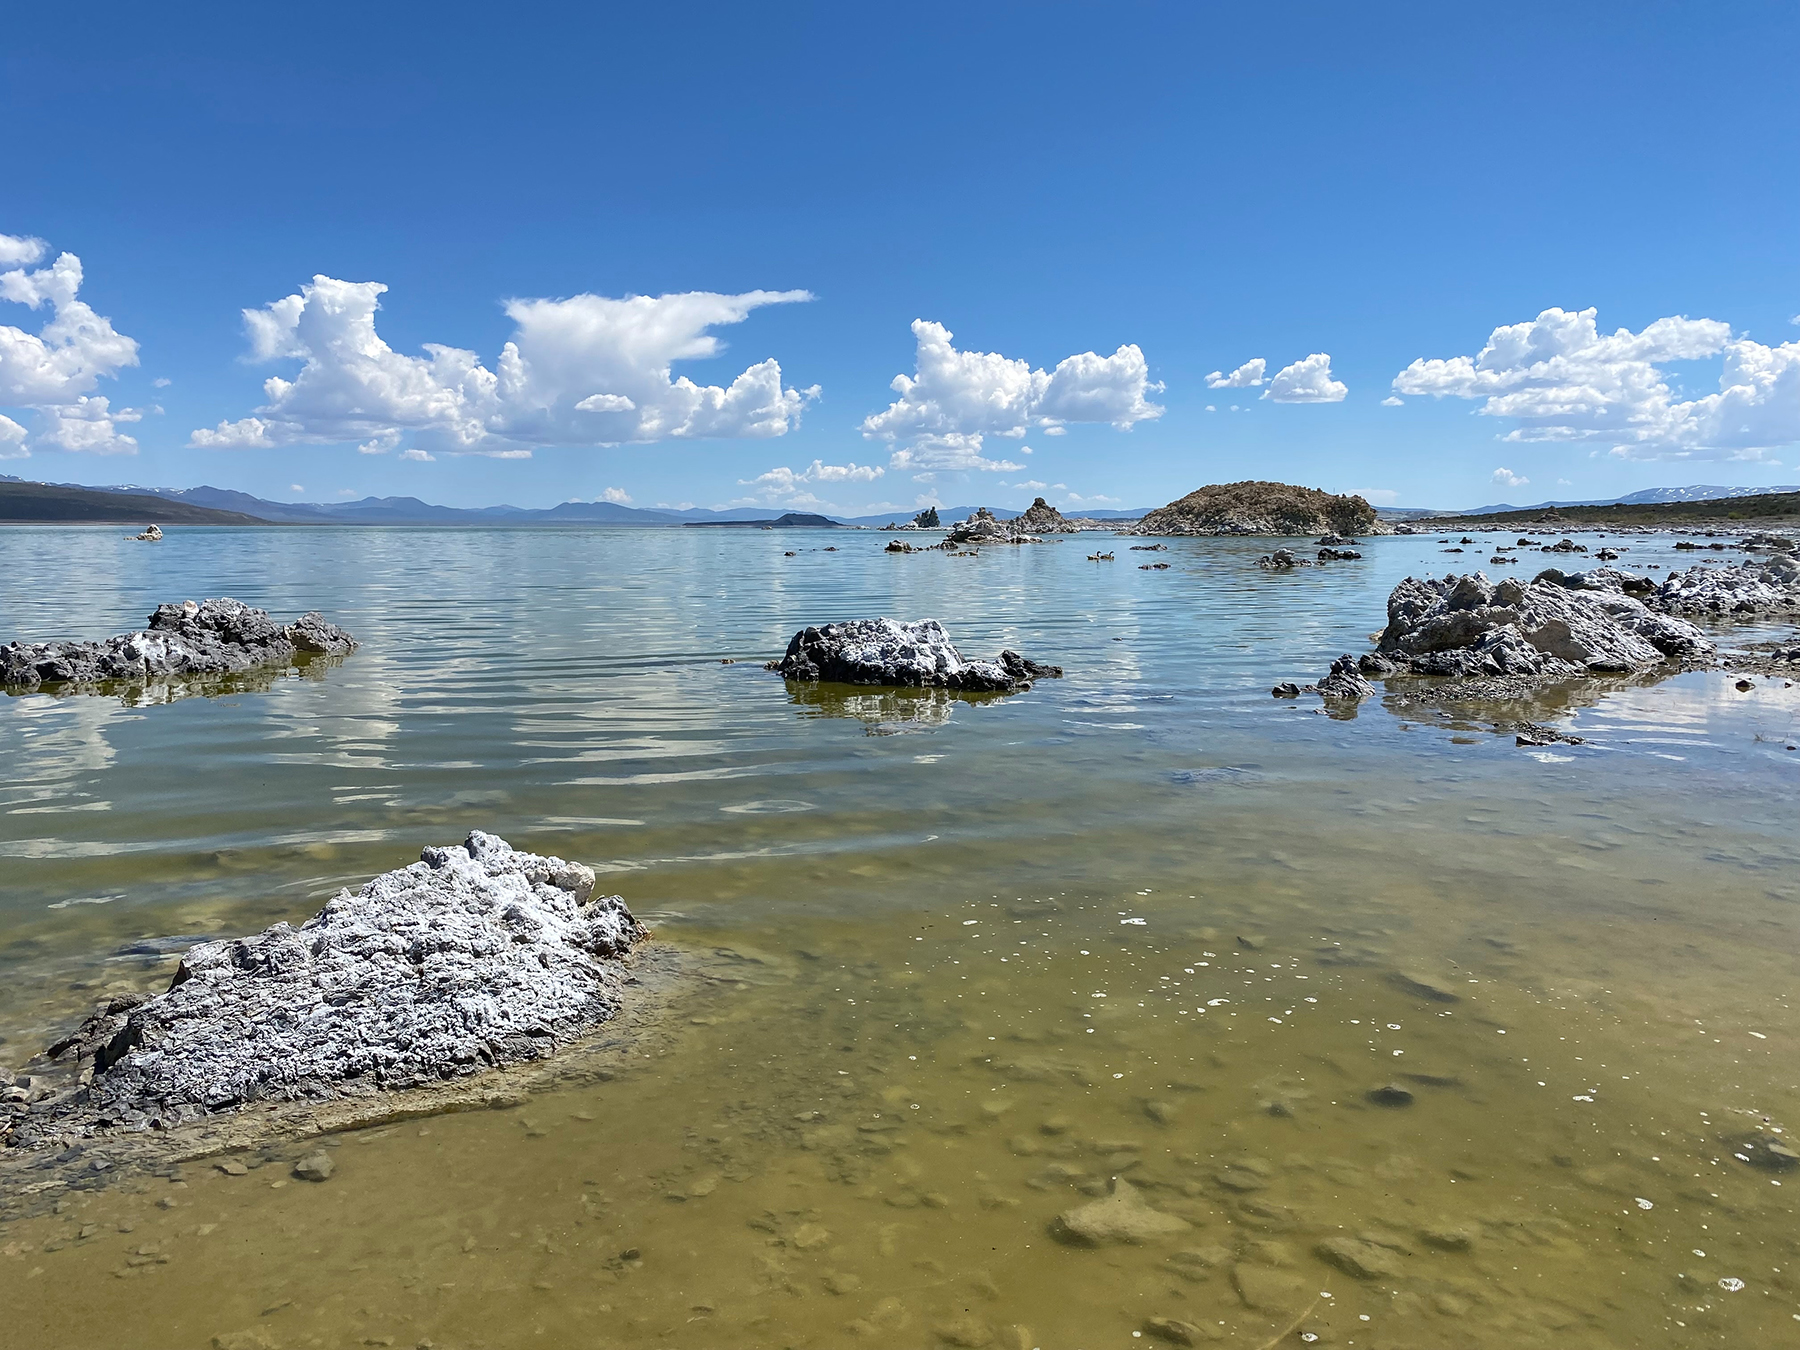 View of Mono Lake from the southwestern shore on May 20, 2023. (Photograph by Cathy Cardno on Unsplash)